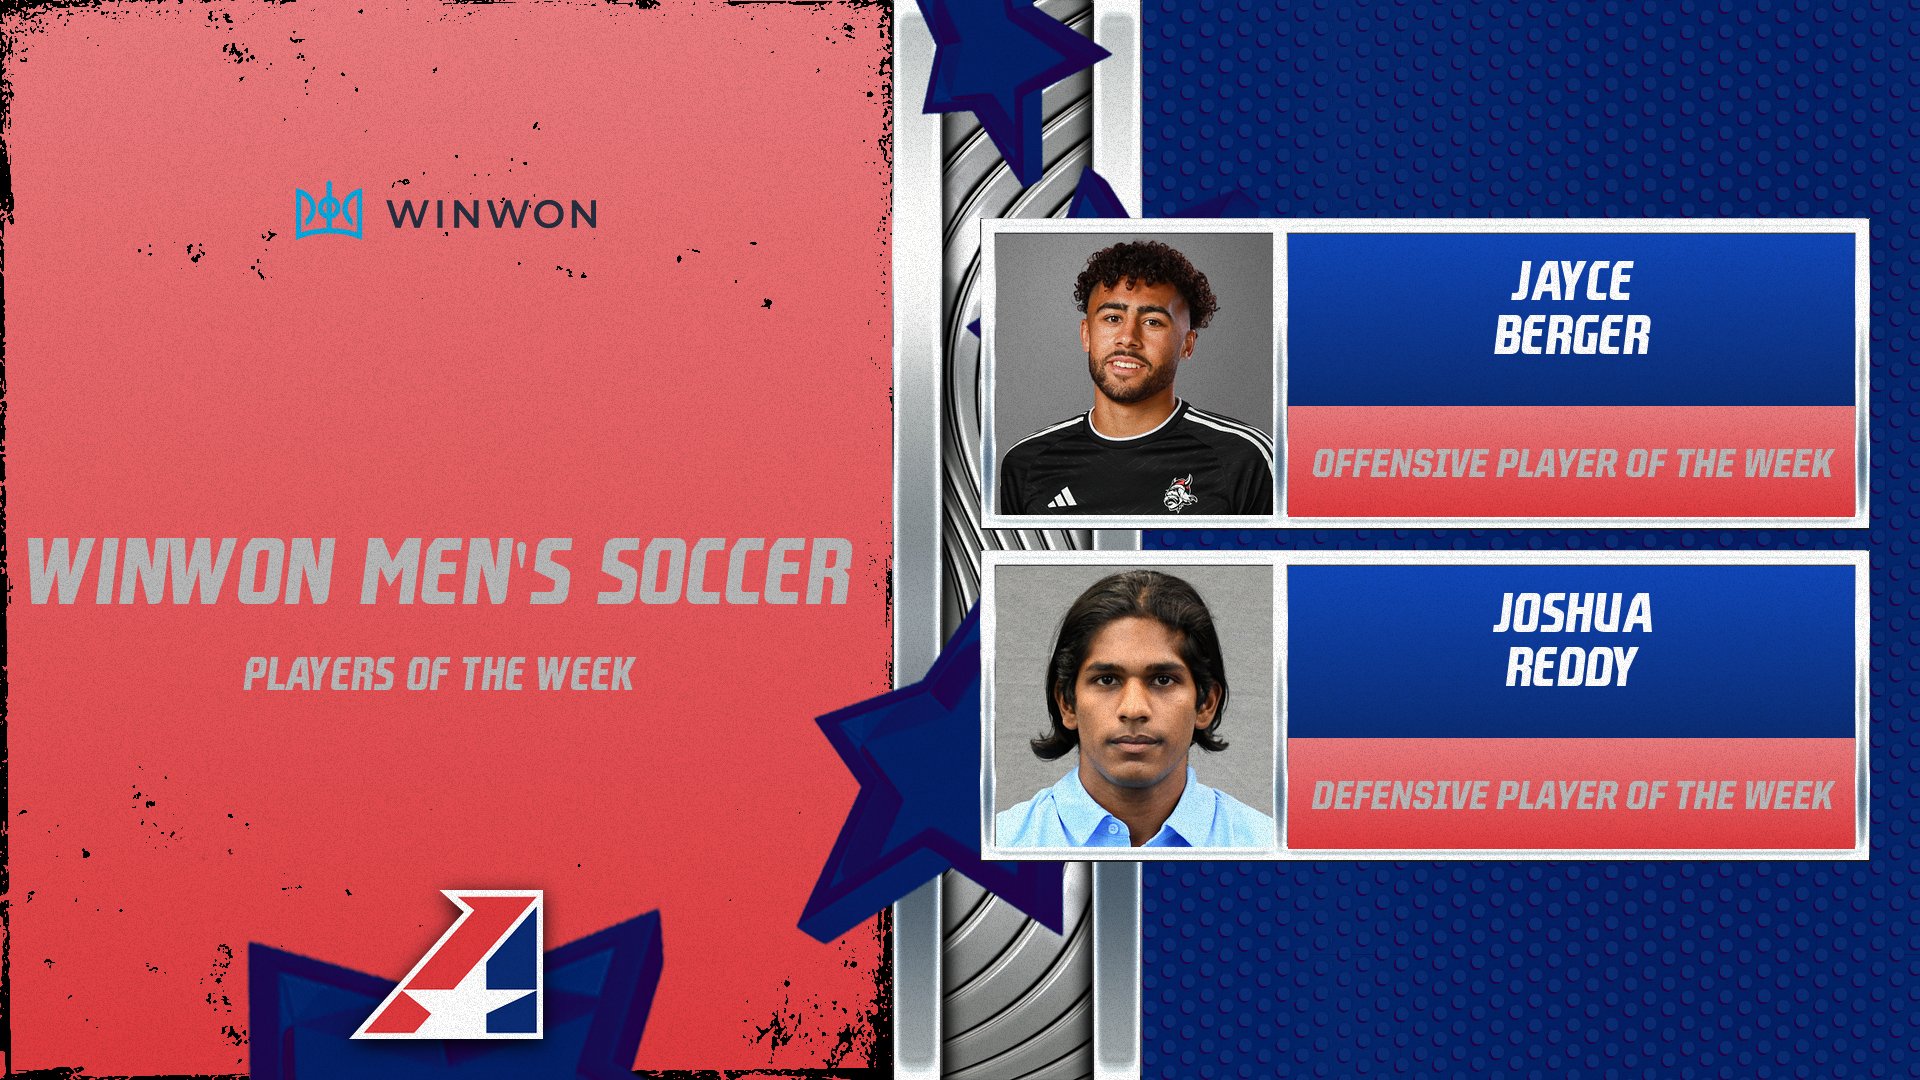 WinWon Men’s Soccer Players of the Week Announced – September 11